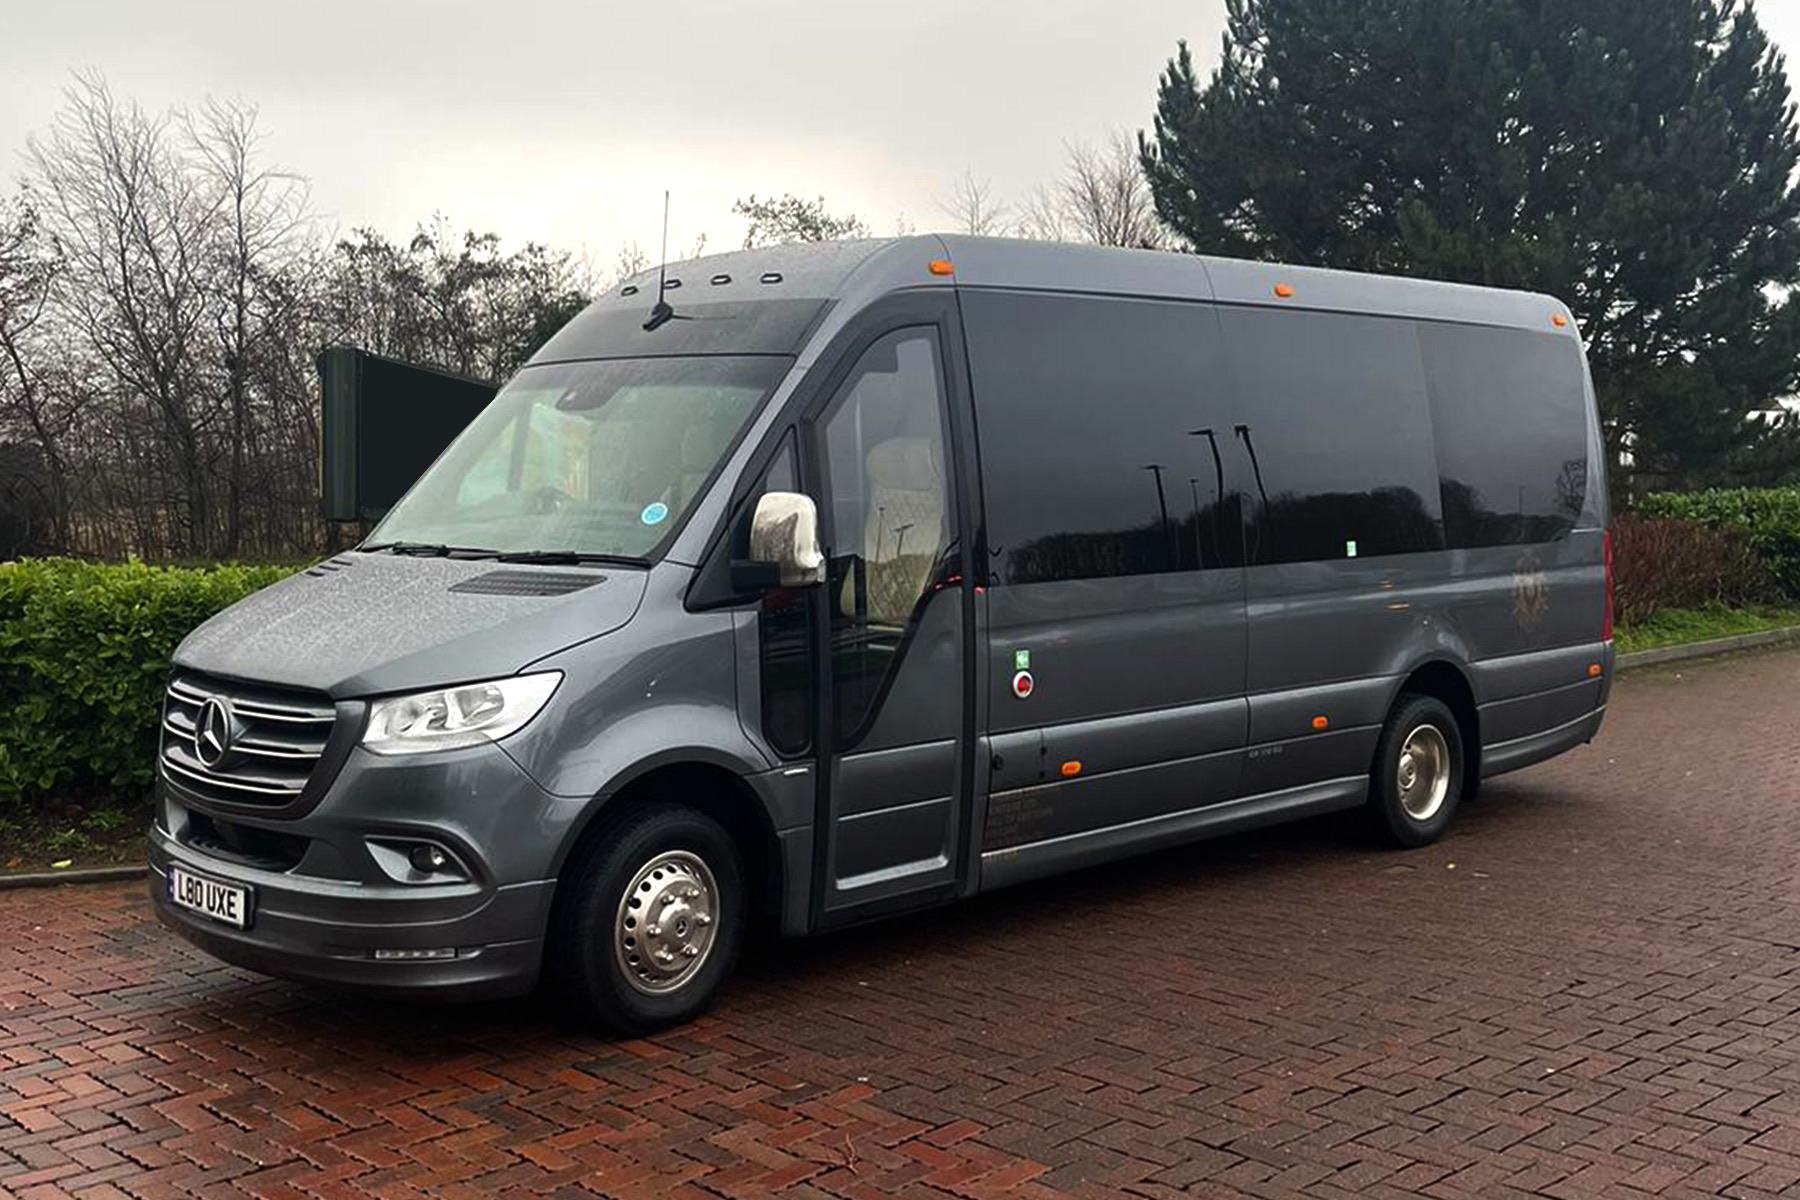 The Essential Guide to Minibus Hire for Prom in the UK